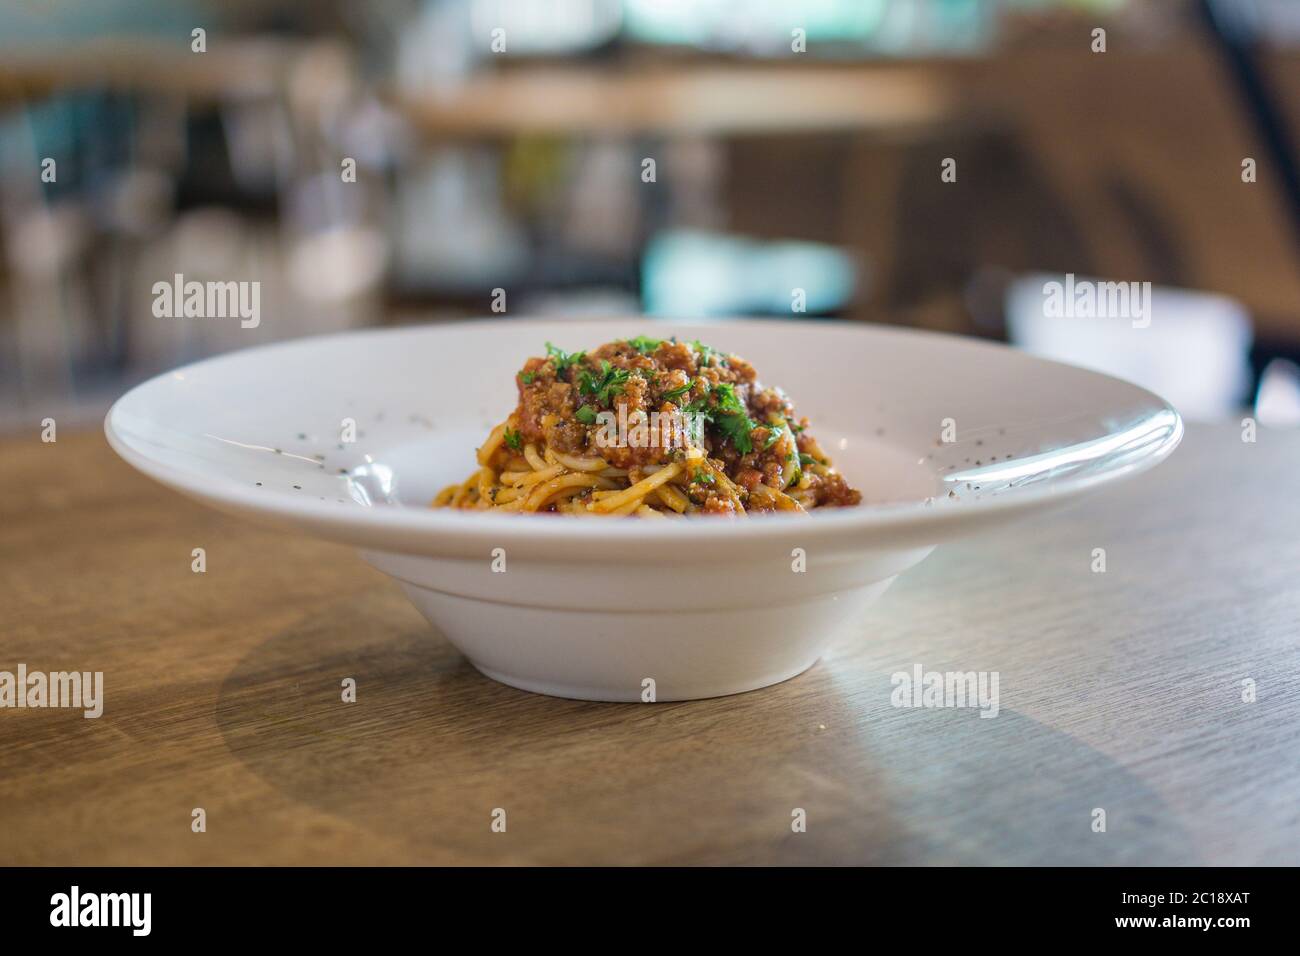 Plate of delicious spaghetti Bolognaise or Bolognese with savory minced beef and tomato sauce garnished with parmesan cheese. Stock Photo